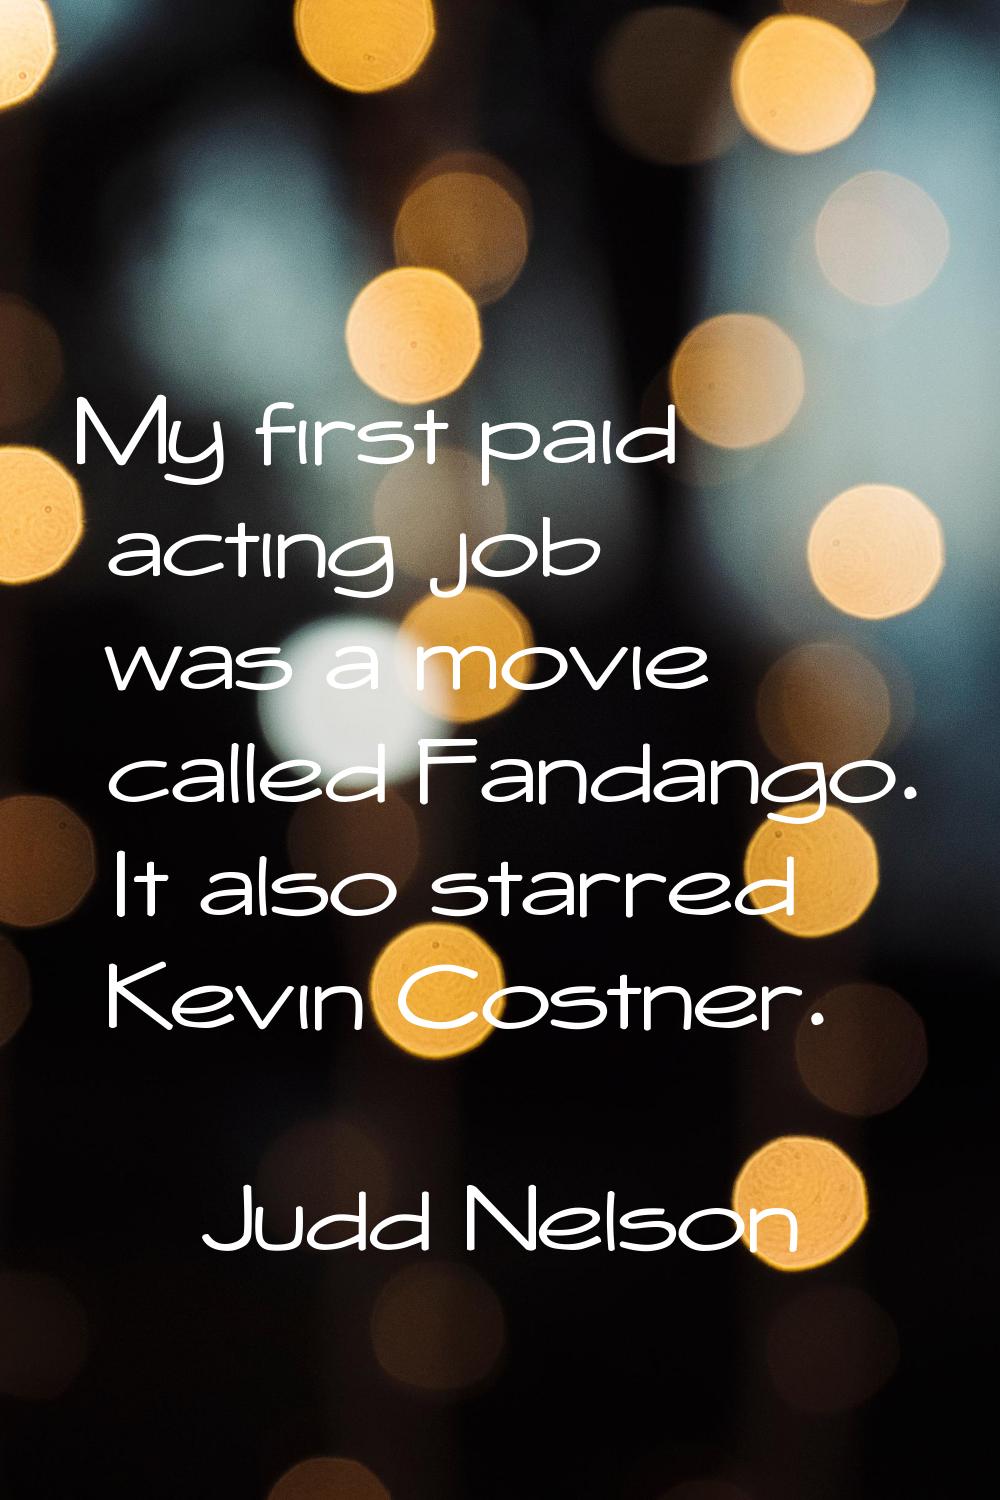 My first paid acting job was a movie called Fandango. It also starred Kevin Costner.